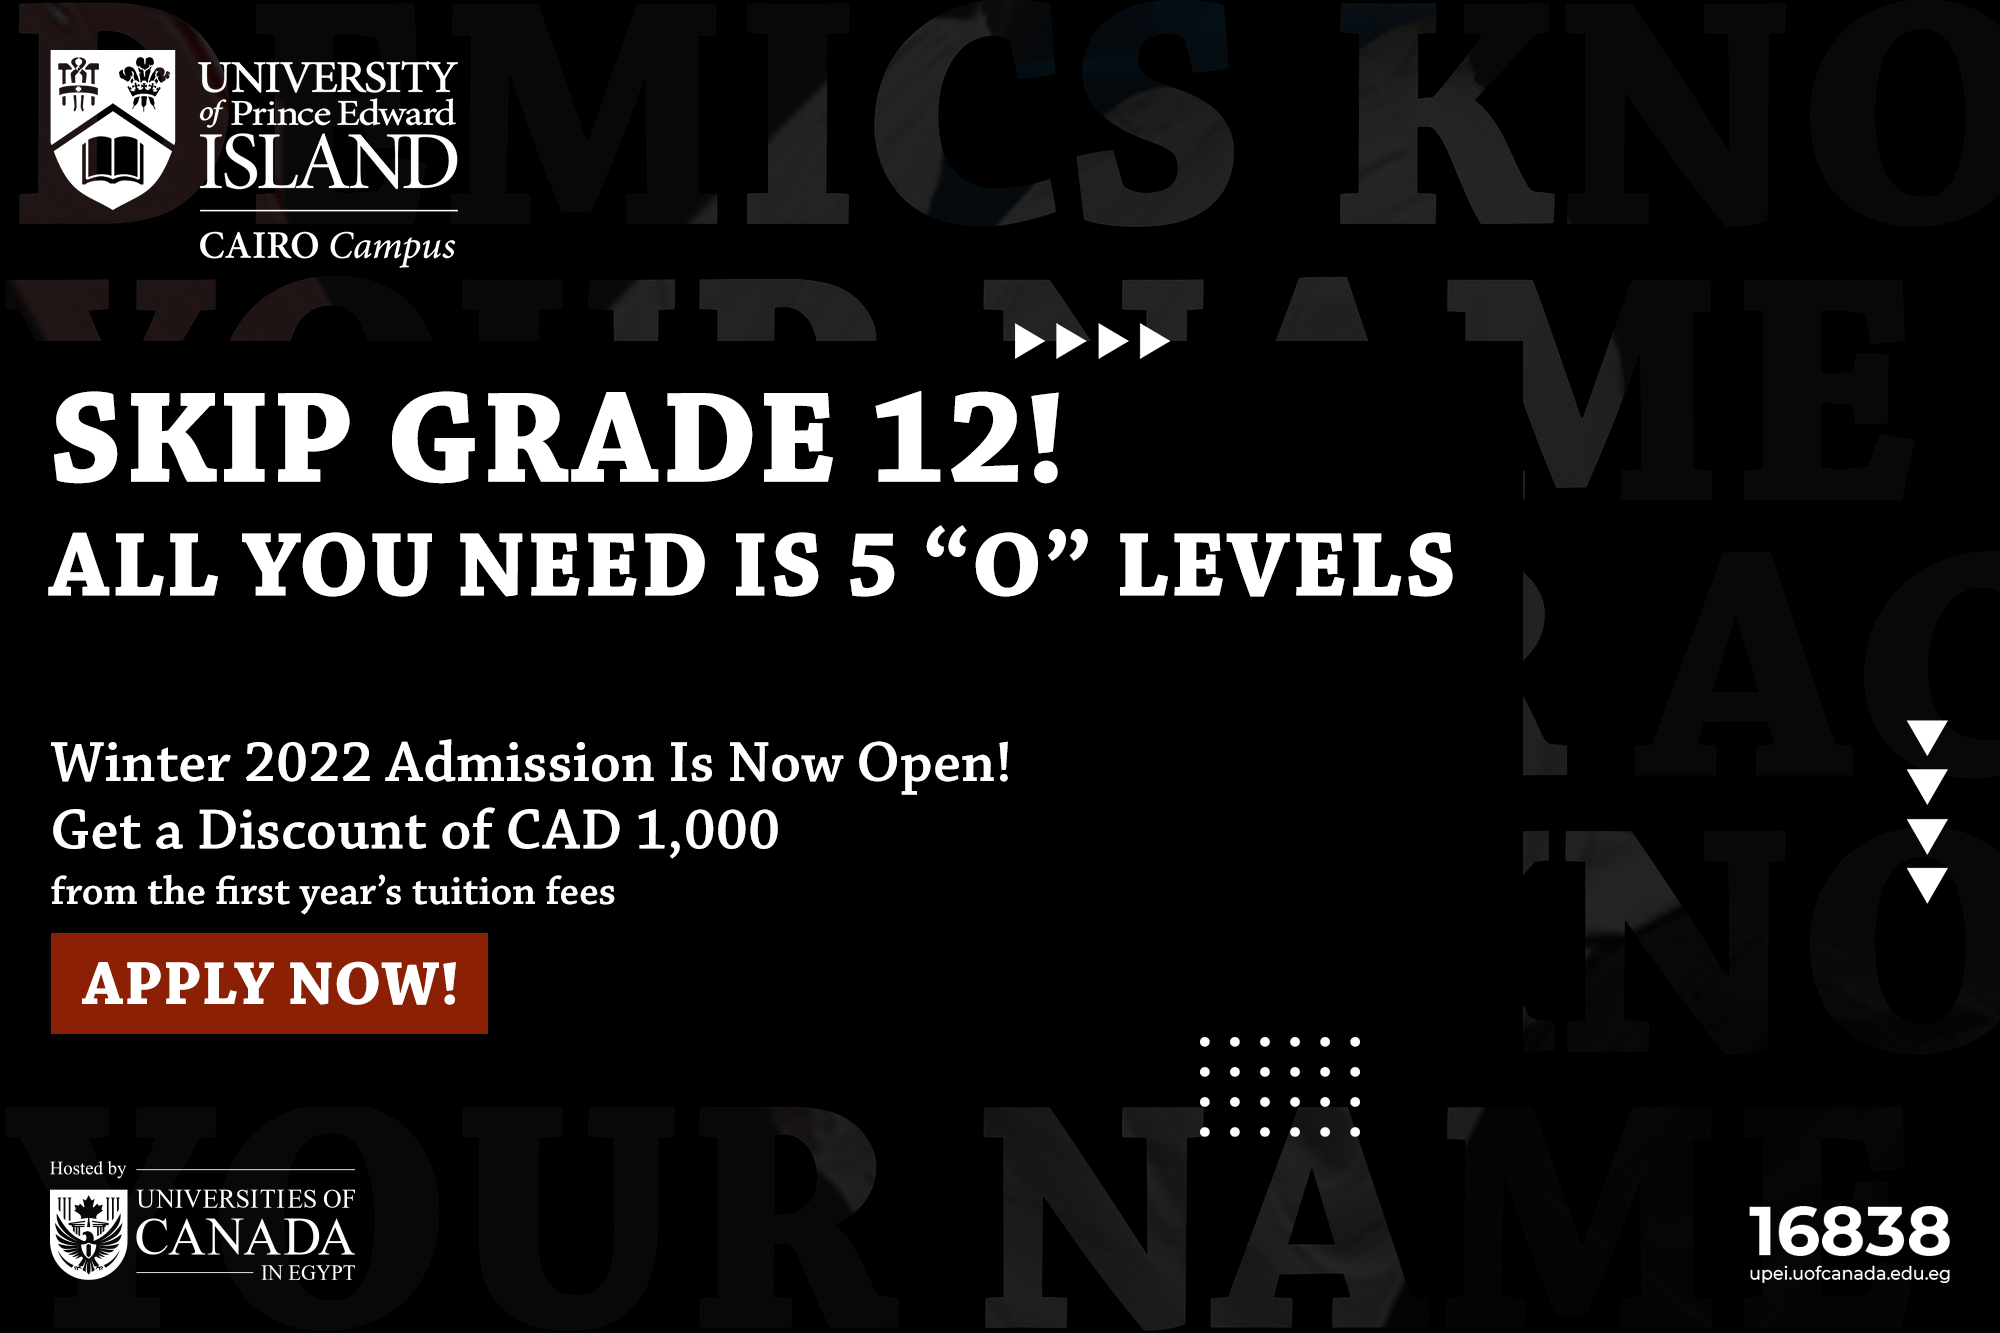 IGCSE Students, your grades are out! Skip Grade 12, and Apply Now for UPEI Cairo Campus